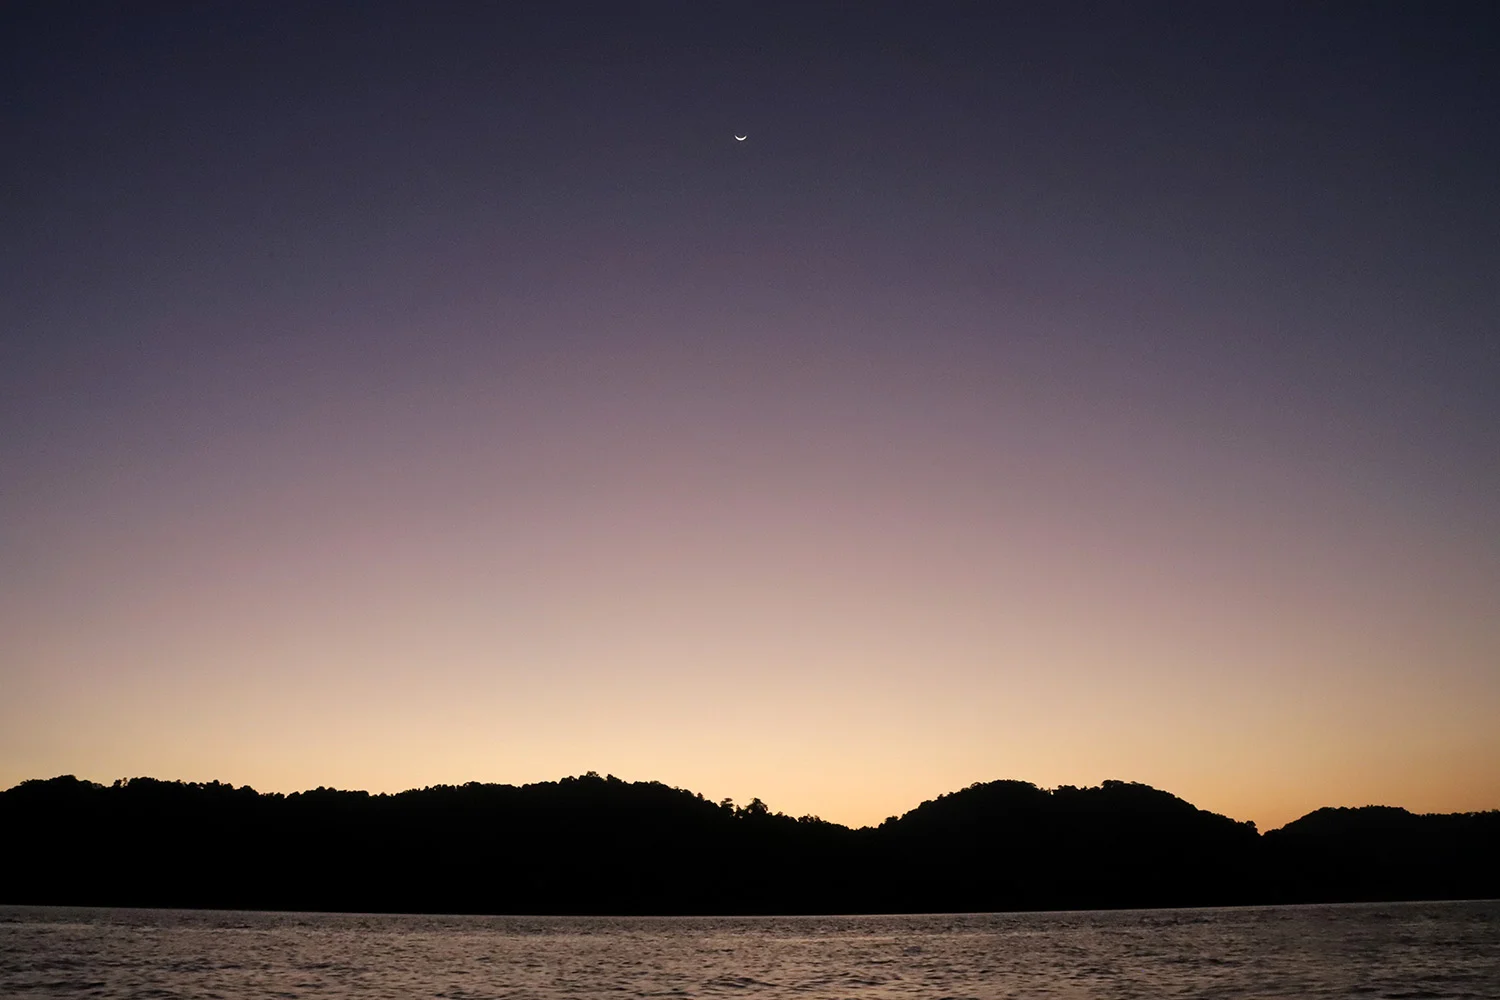 A purple and yellow sunset over an island in Mu Ko Surin National Park in Thailand with a crescent moon overhead.